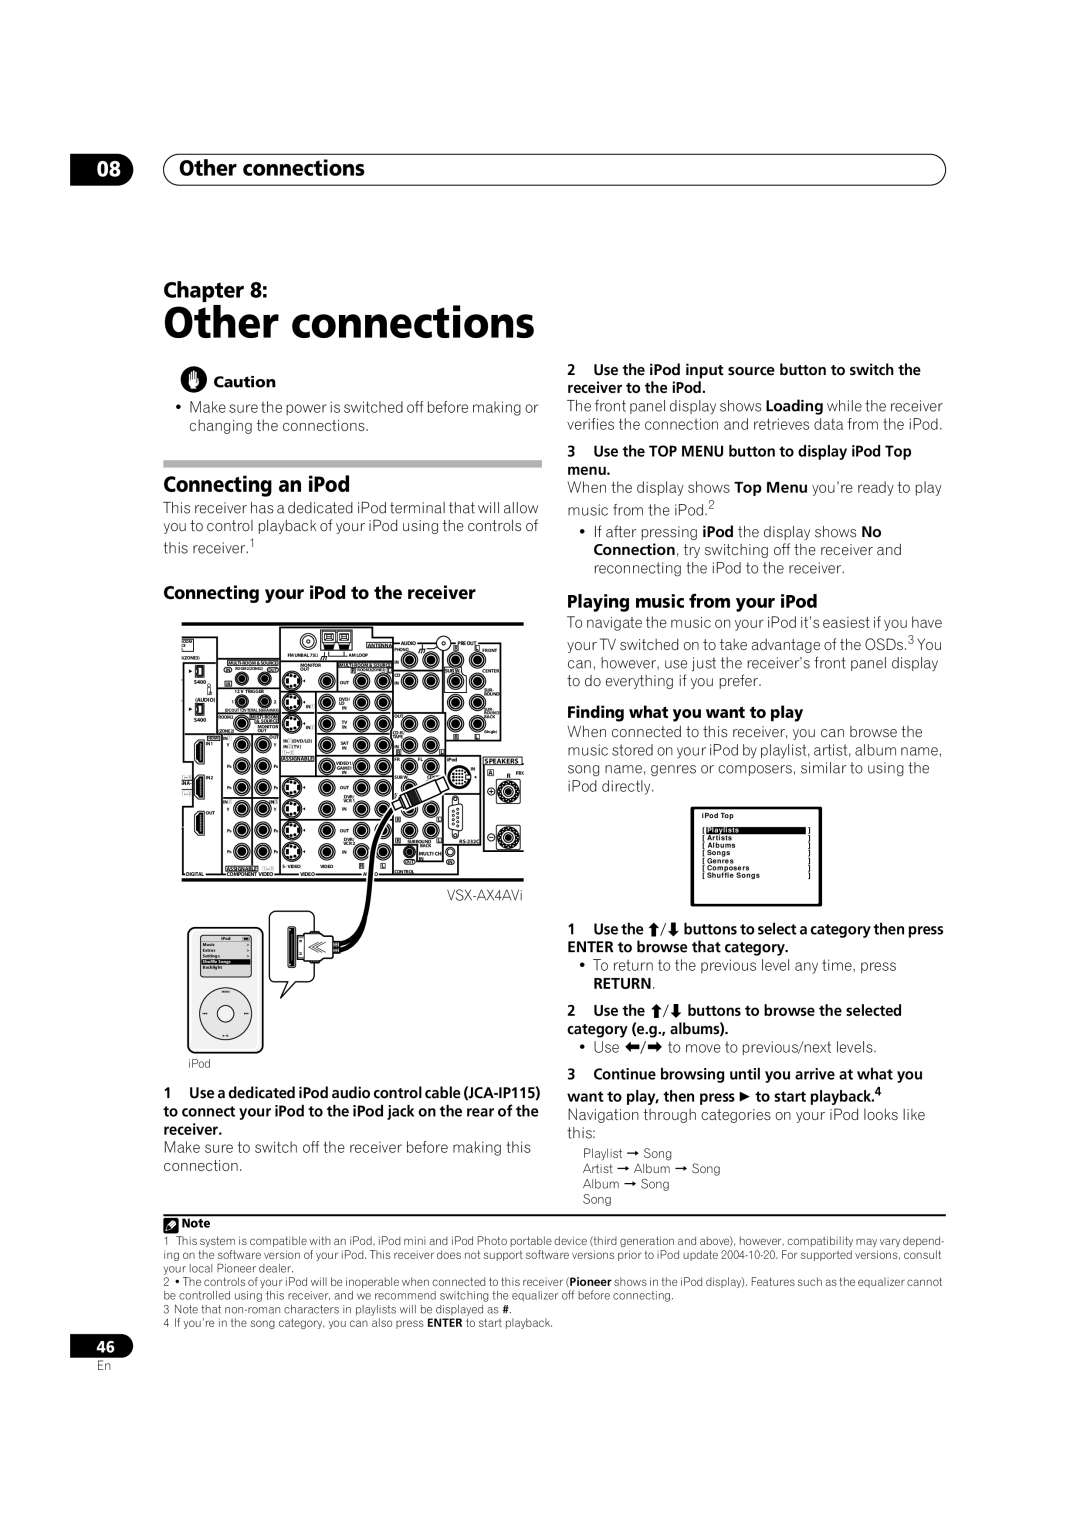 Pioneer VSX-AX2AV-G manual 08Other connections Chapter, Connecting an iPod, Connecting your iPod to the receiver 